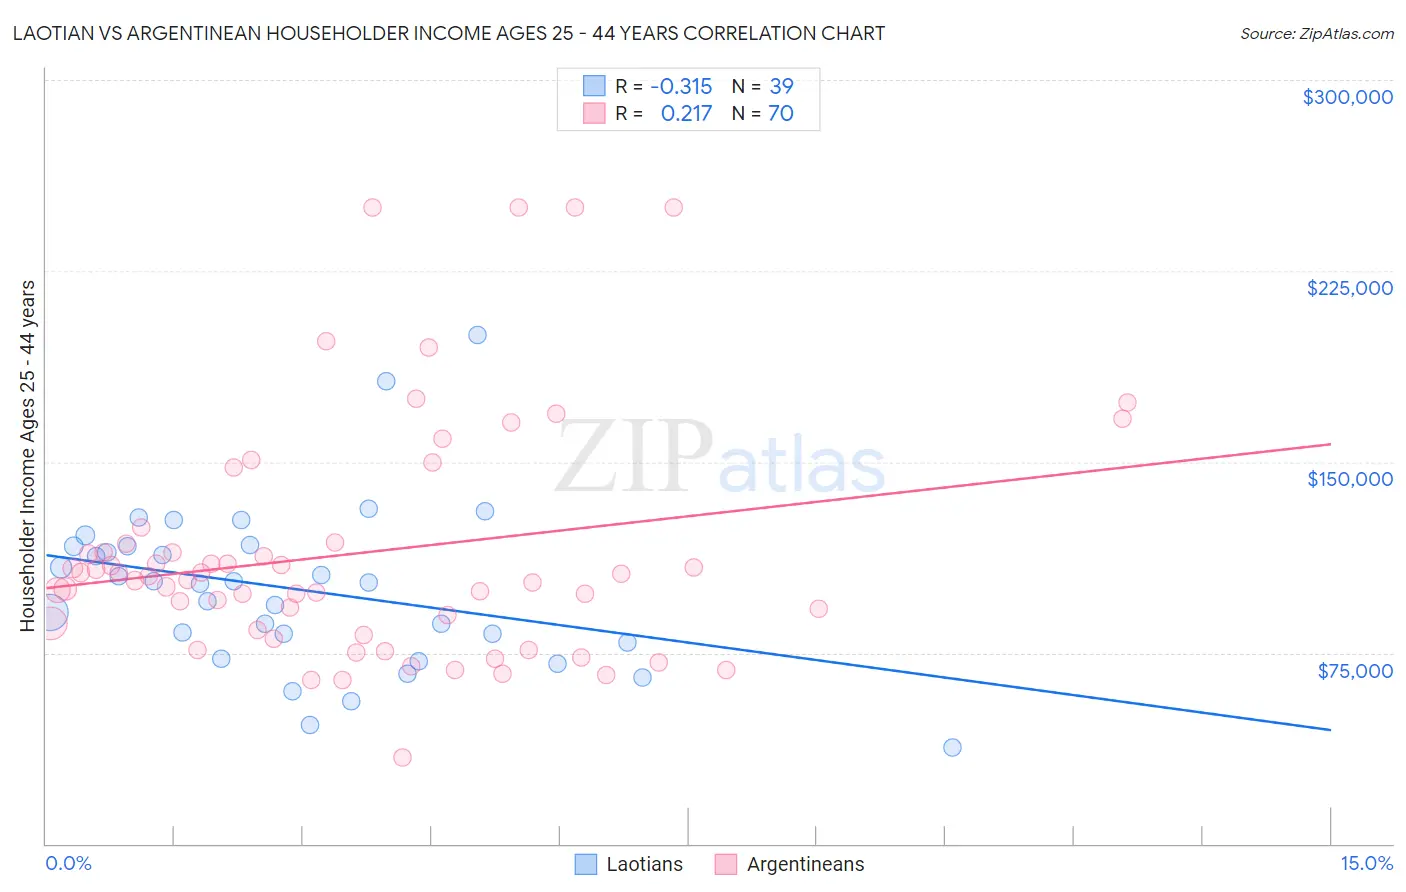 Laotian vs Argentinean Householder Income Ages 25 - 44 years